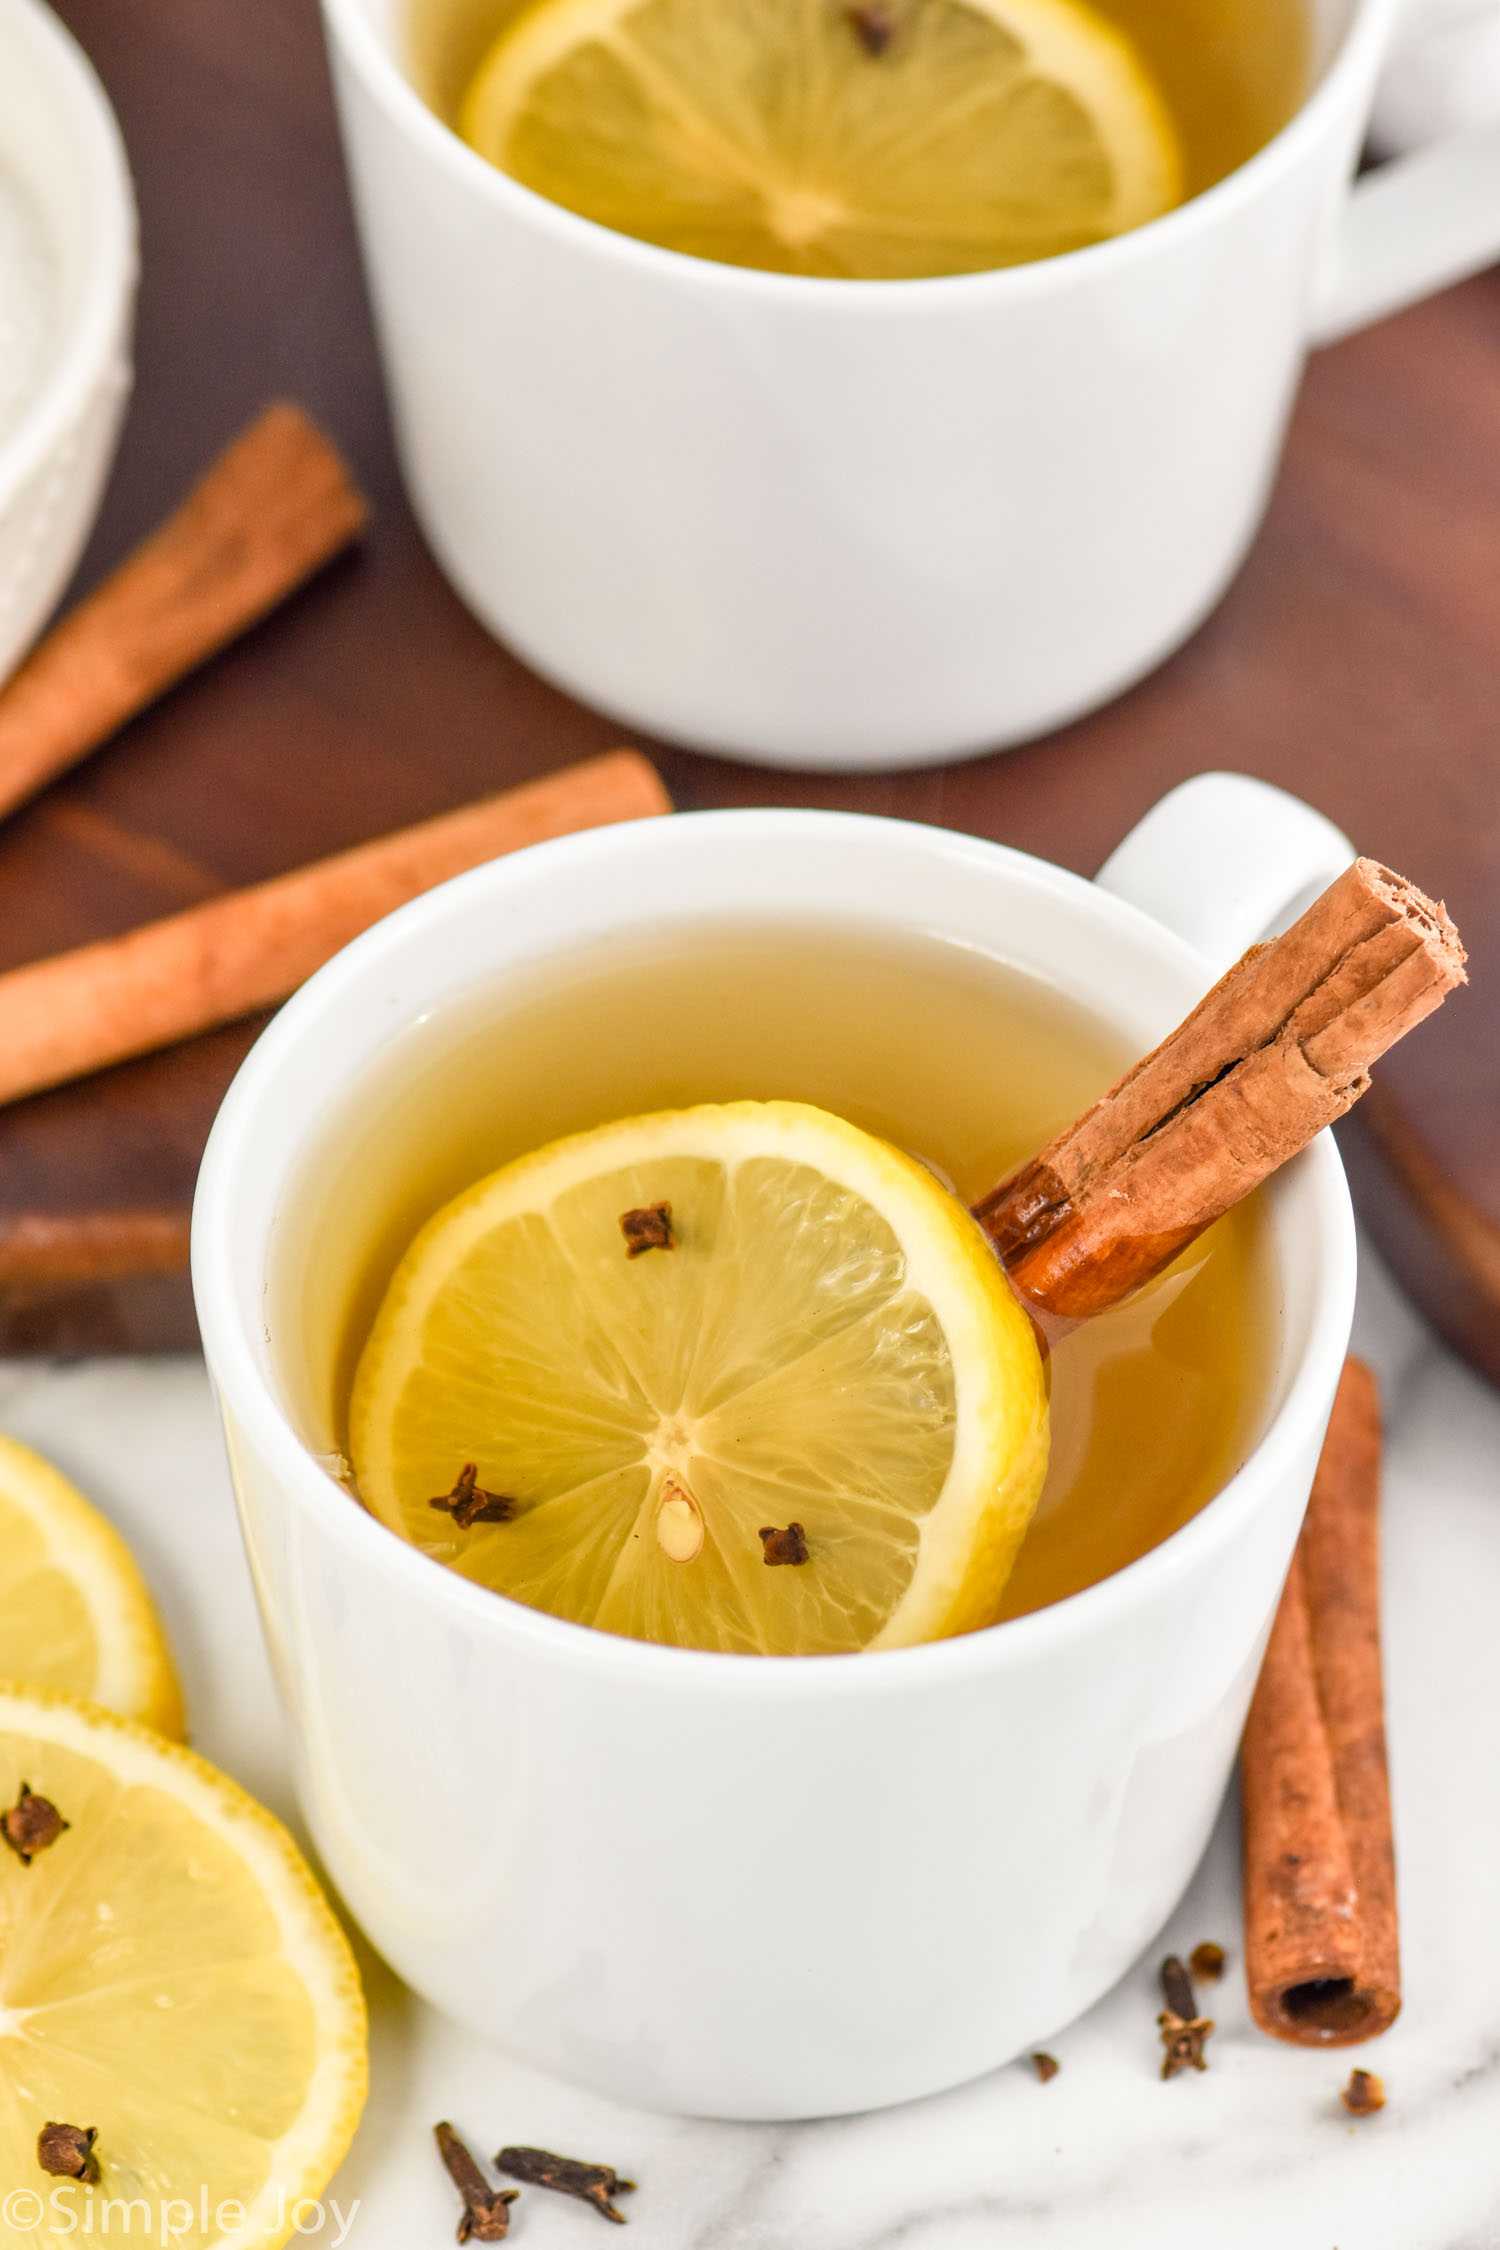 https://www.simplejoy.com/wp-content/uploads/2022/11/recipe-for-hot-toddy.jpg